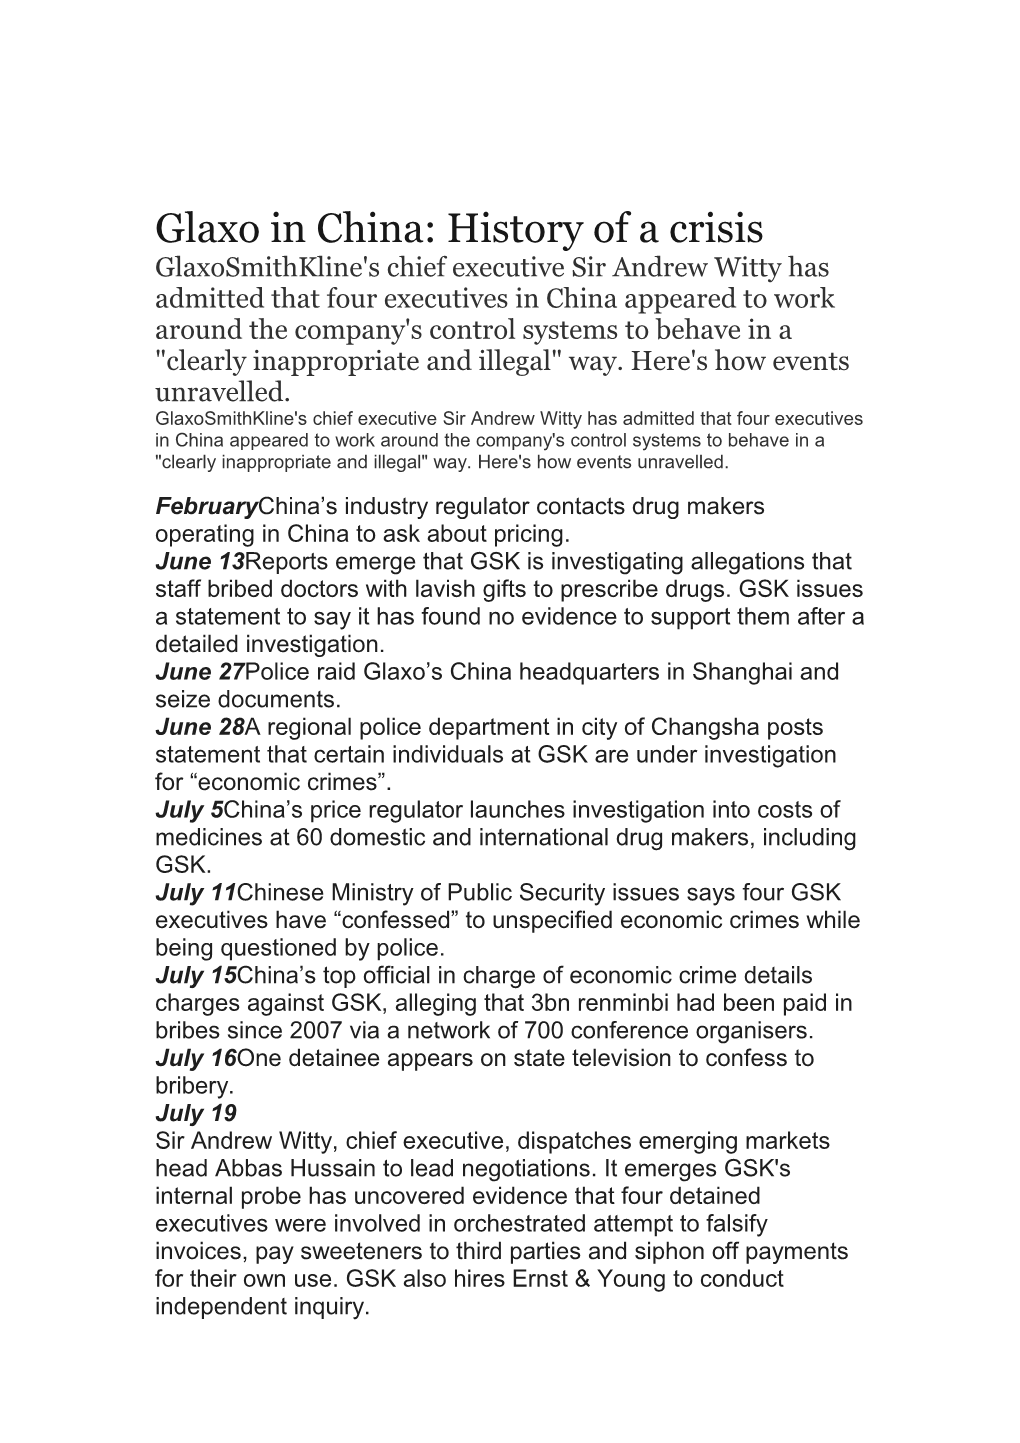 Glaxo in China: History of a Crisis